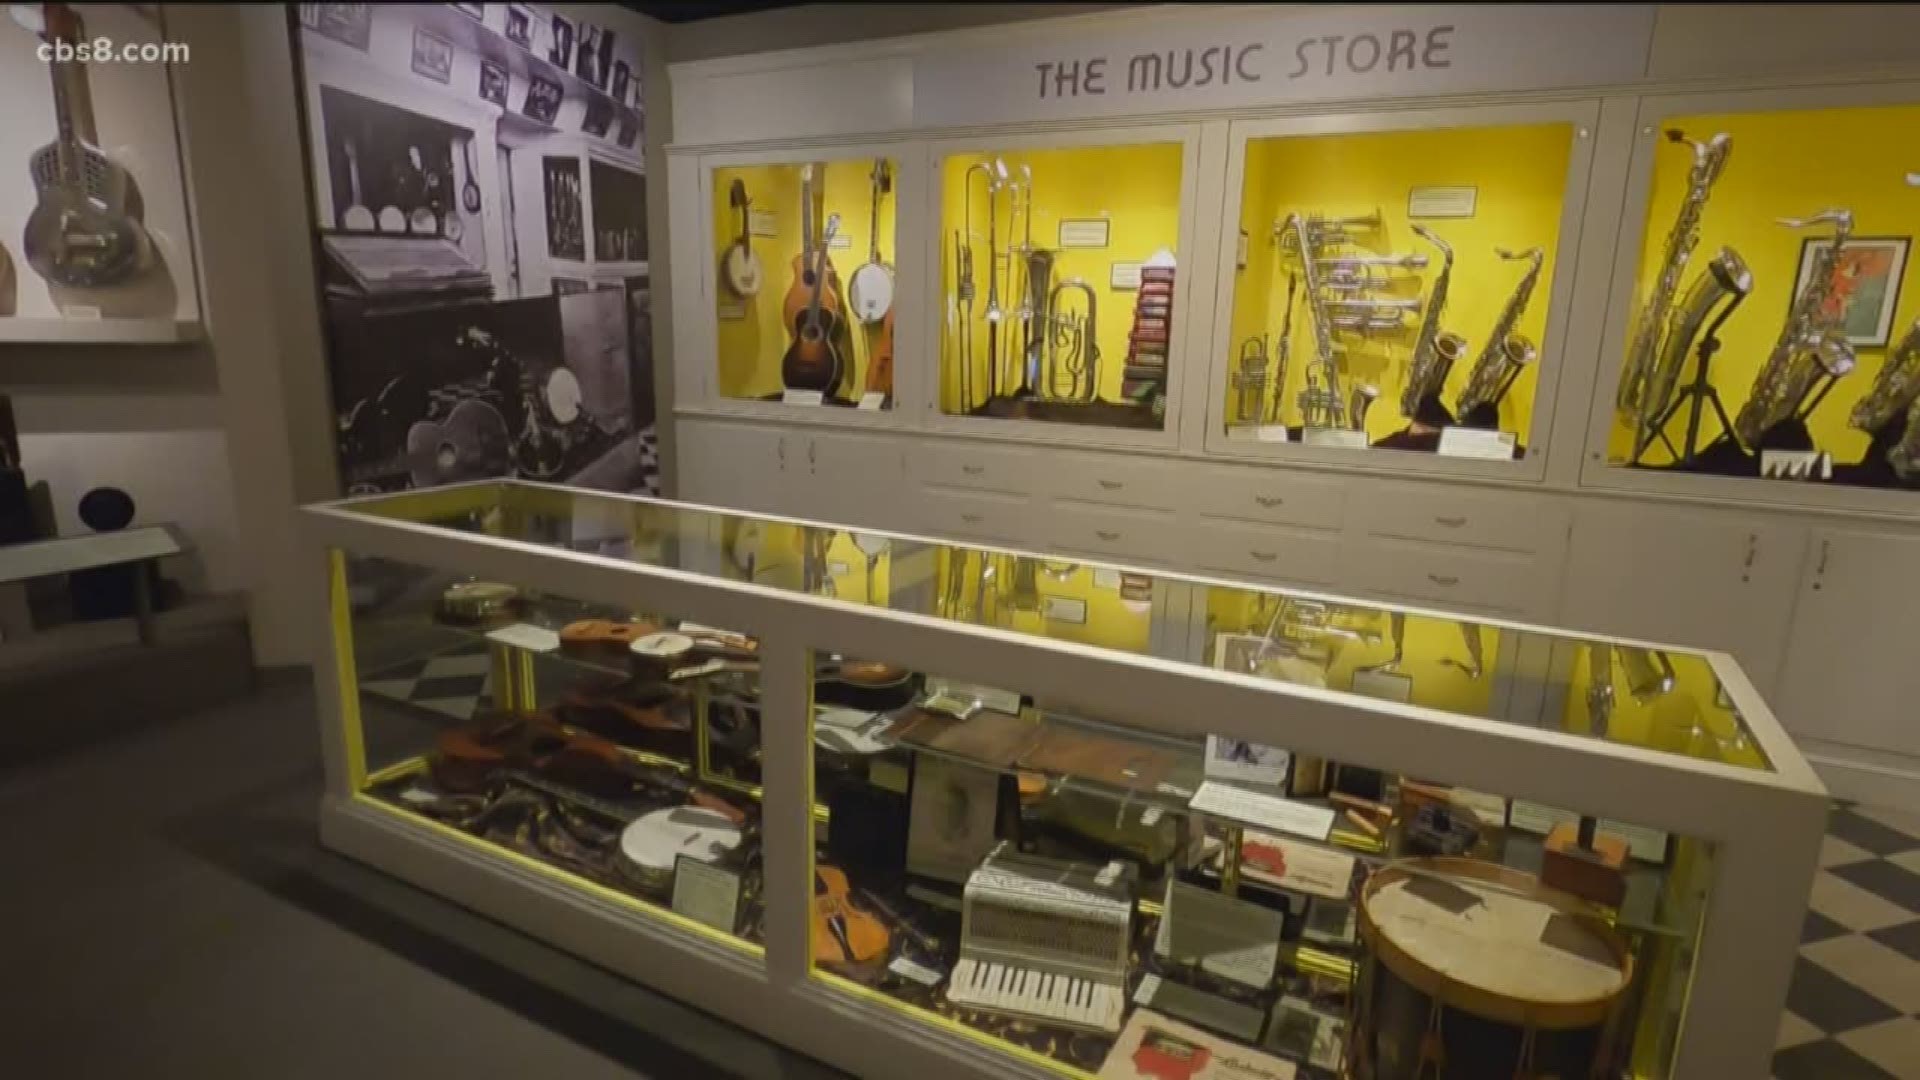 Jenny Milkowski stopped by the Museum of Making Music to get ready for the Grammys on Sunday.